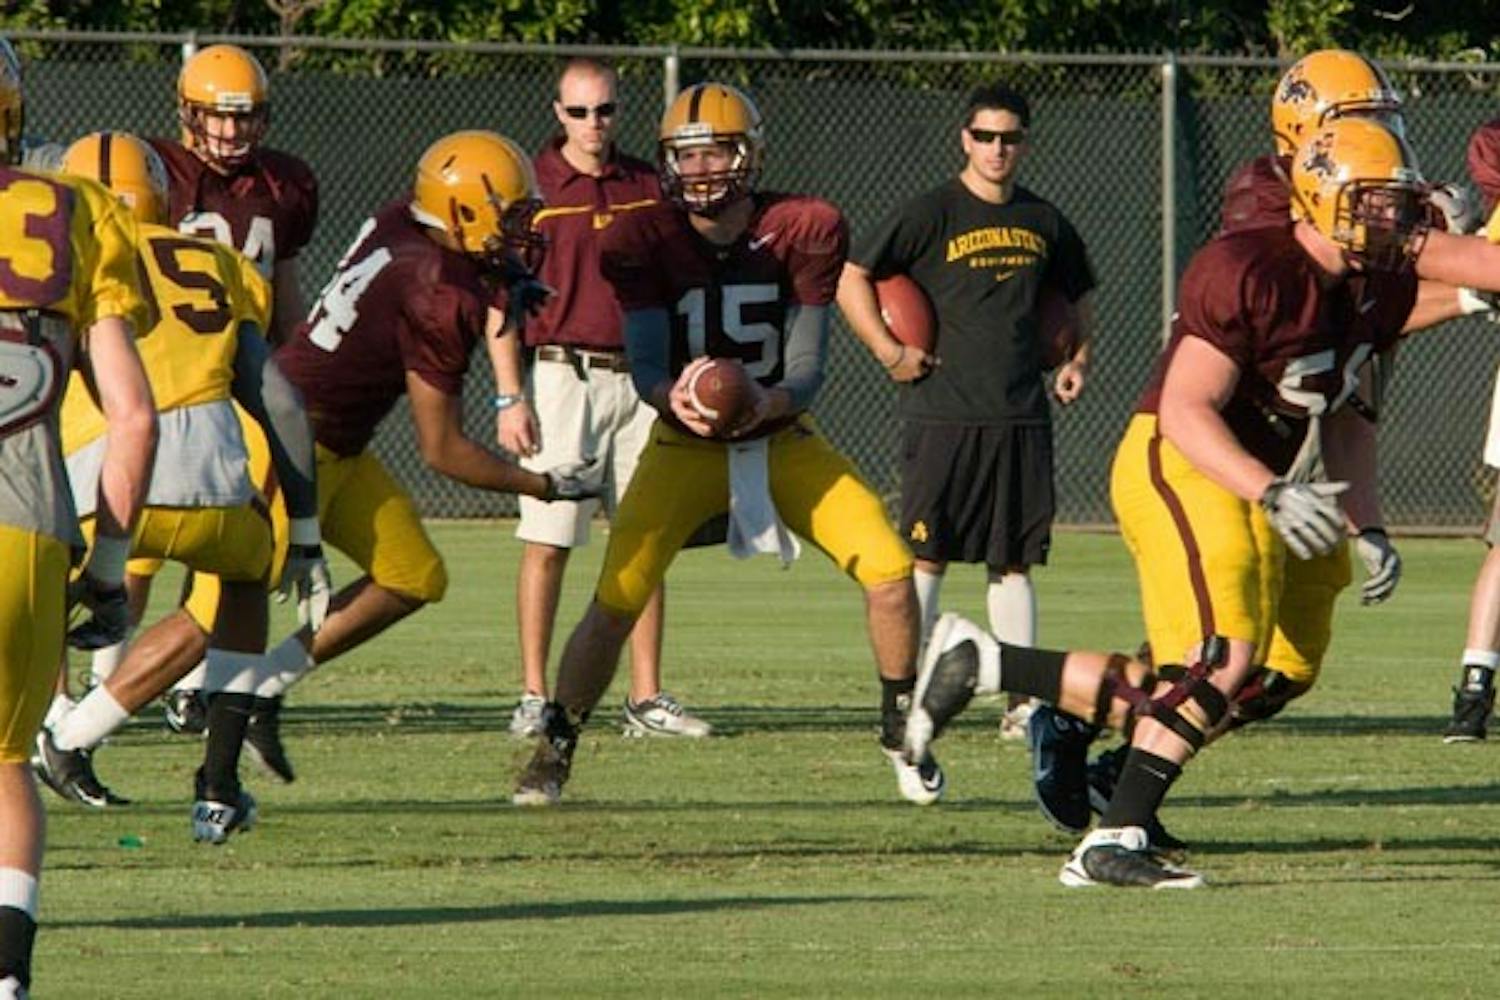 SCOUTING REPORT: Freshman quarterback Taylor Kelly leads the offense during a scout team scrimmage at football practice Thursday. Kelly was 7-of-10 passing with a touchdown in the midseason scrimmage. (Photo by Aaron Lavinksy)